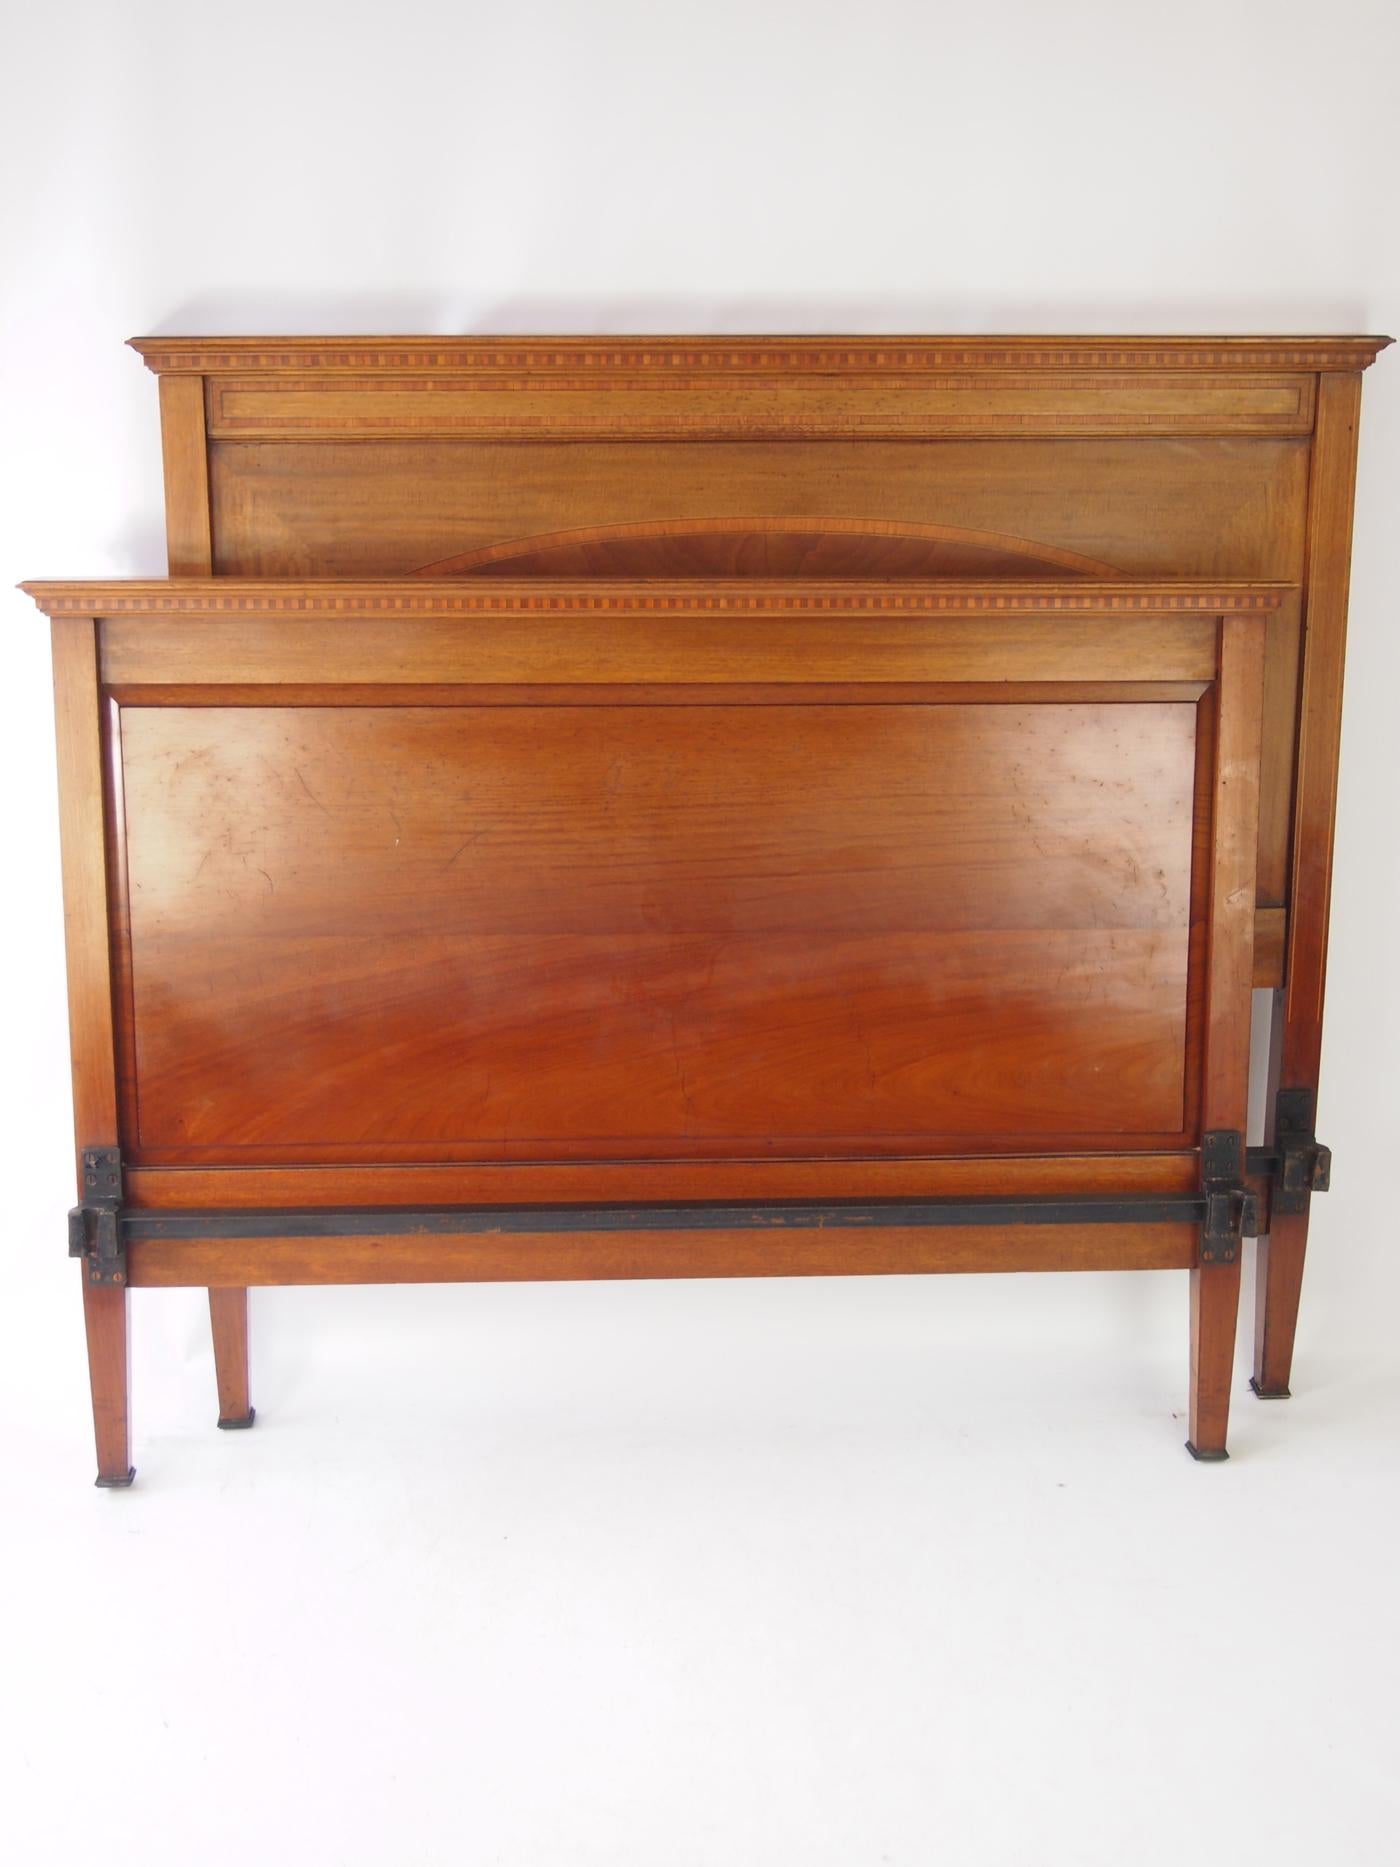 A handsome antique late Victorian mahogany and inlaid double bed dating from circa 1895. In a richly figured mahogany frame, the headboard and footboard inlaid with satinwood. Featuring oval shaped flame figured mahogany veneers to the footboard and